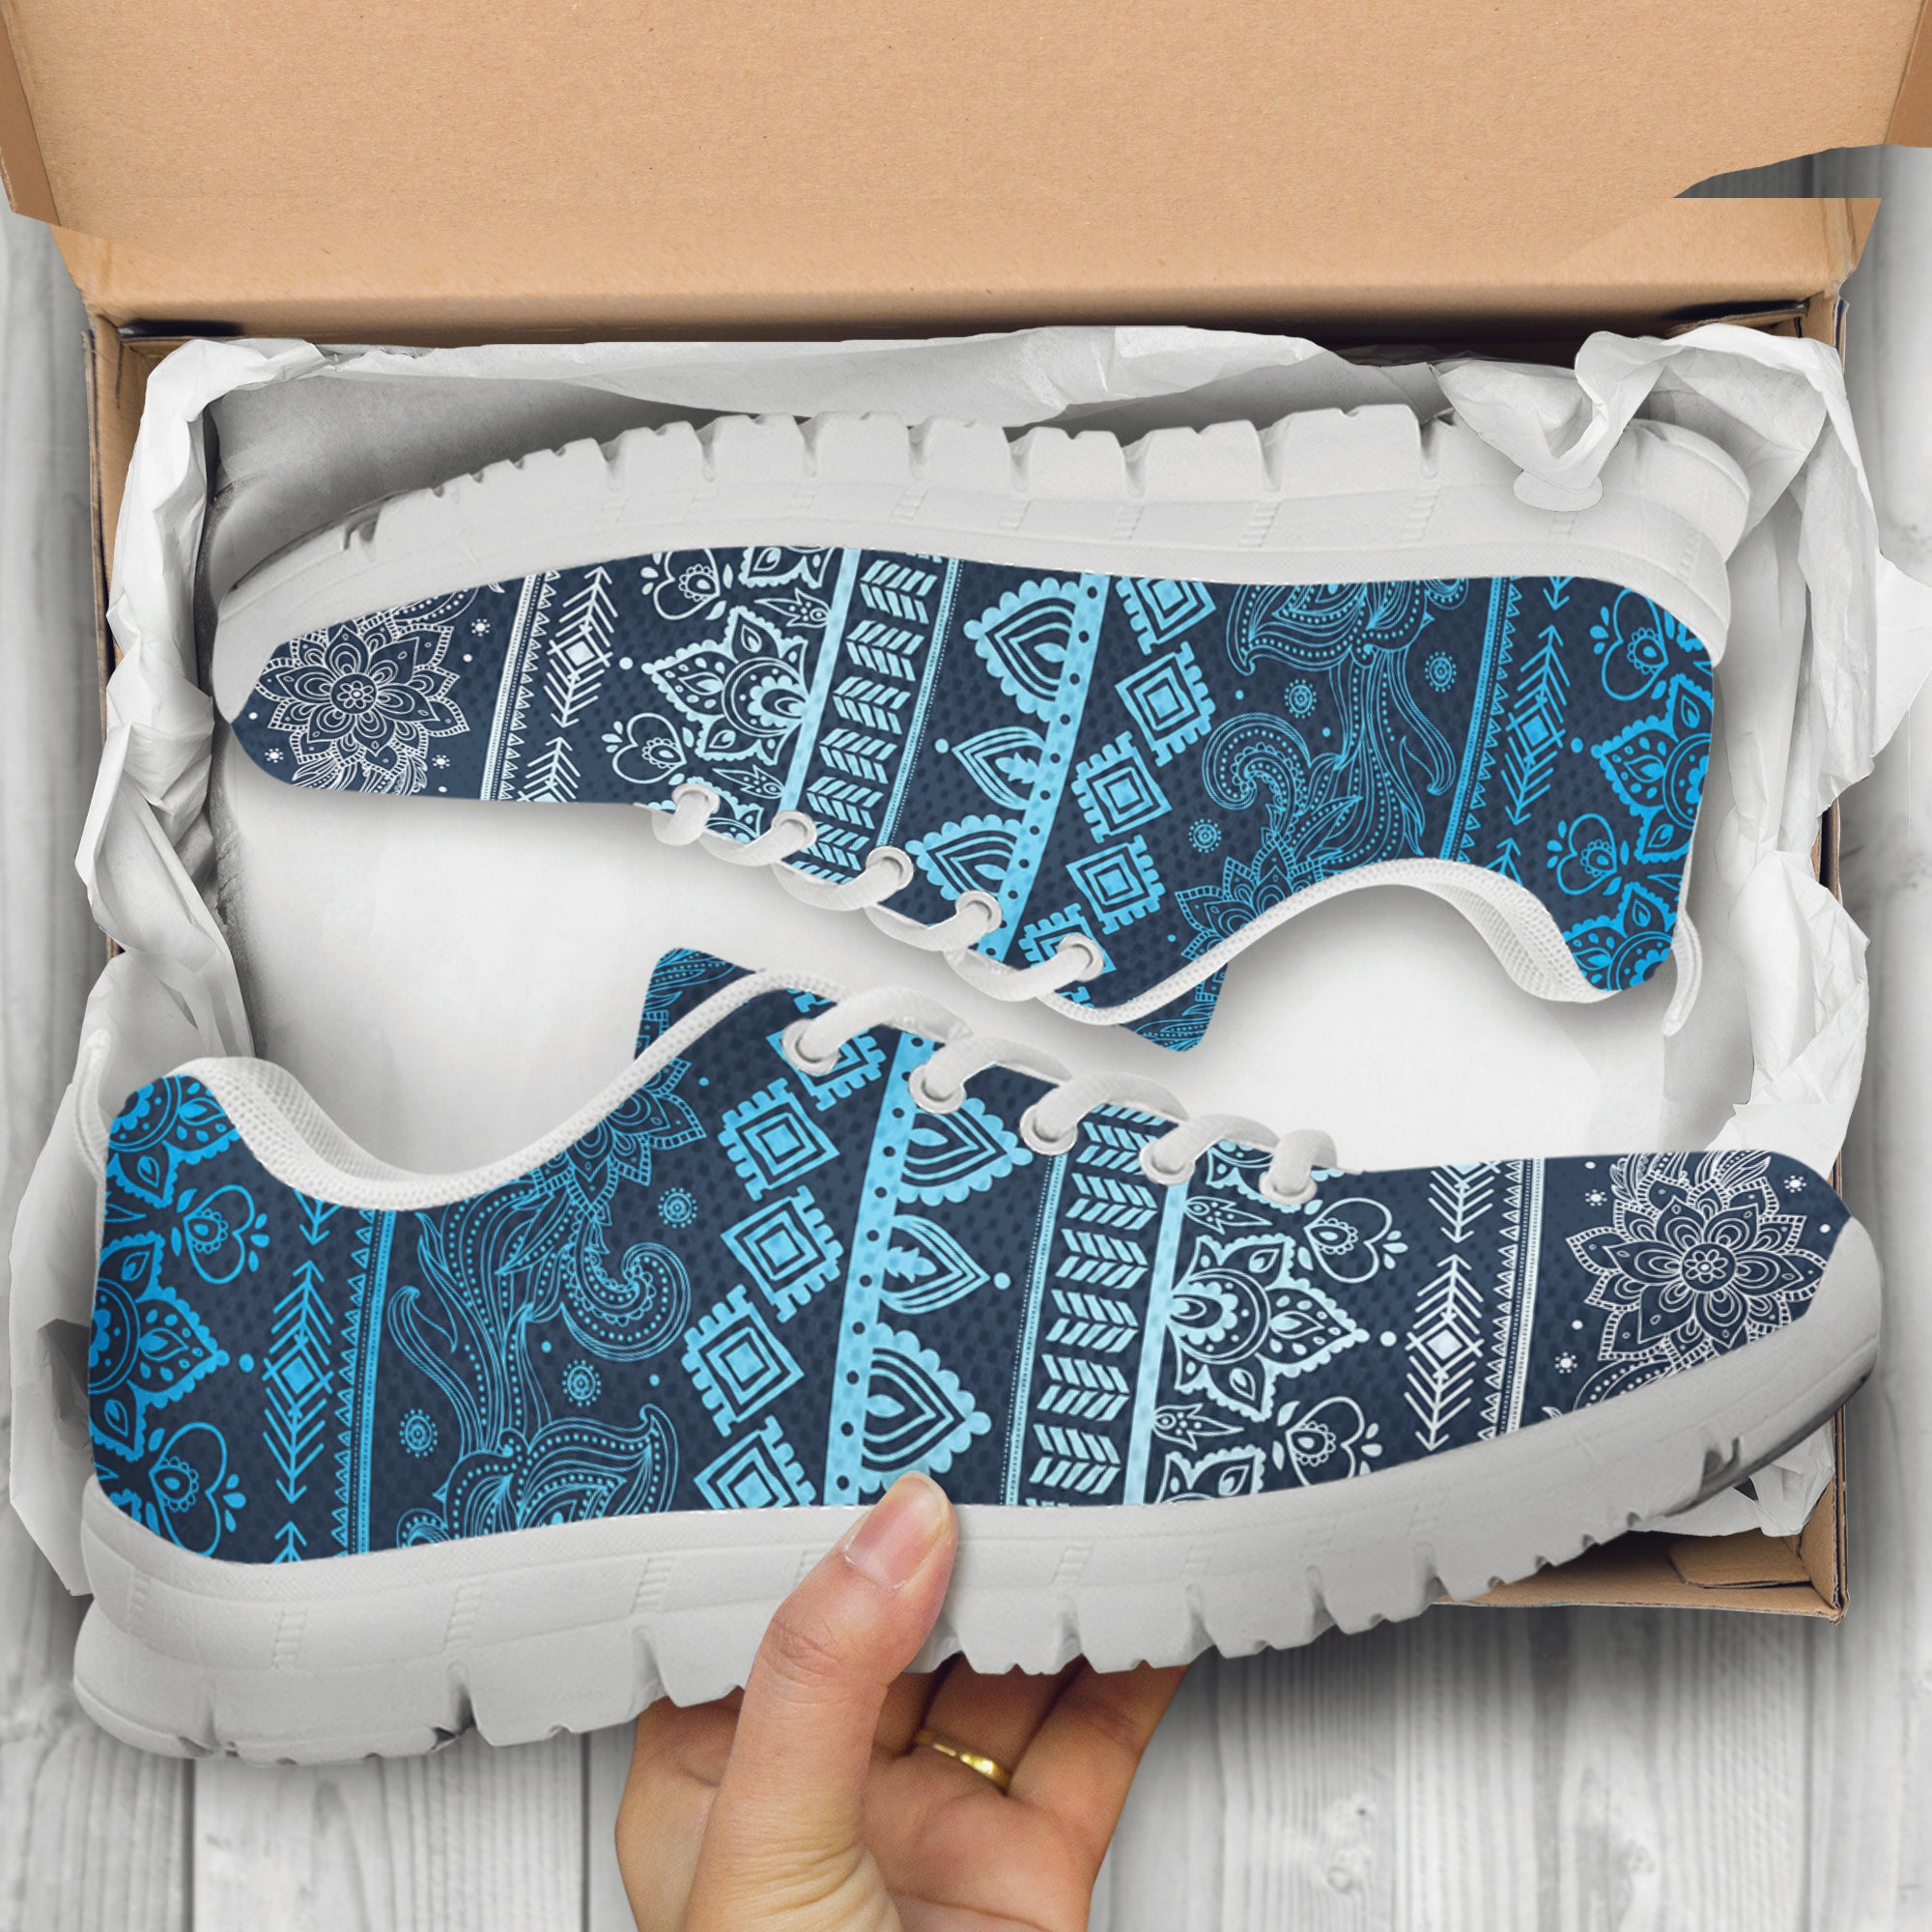 Blue Boho Chic Sneakers